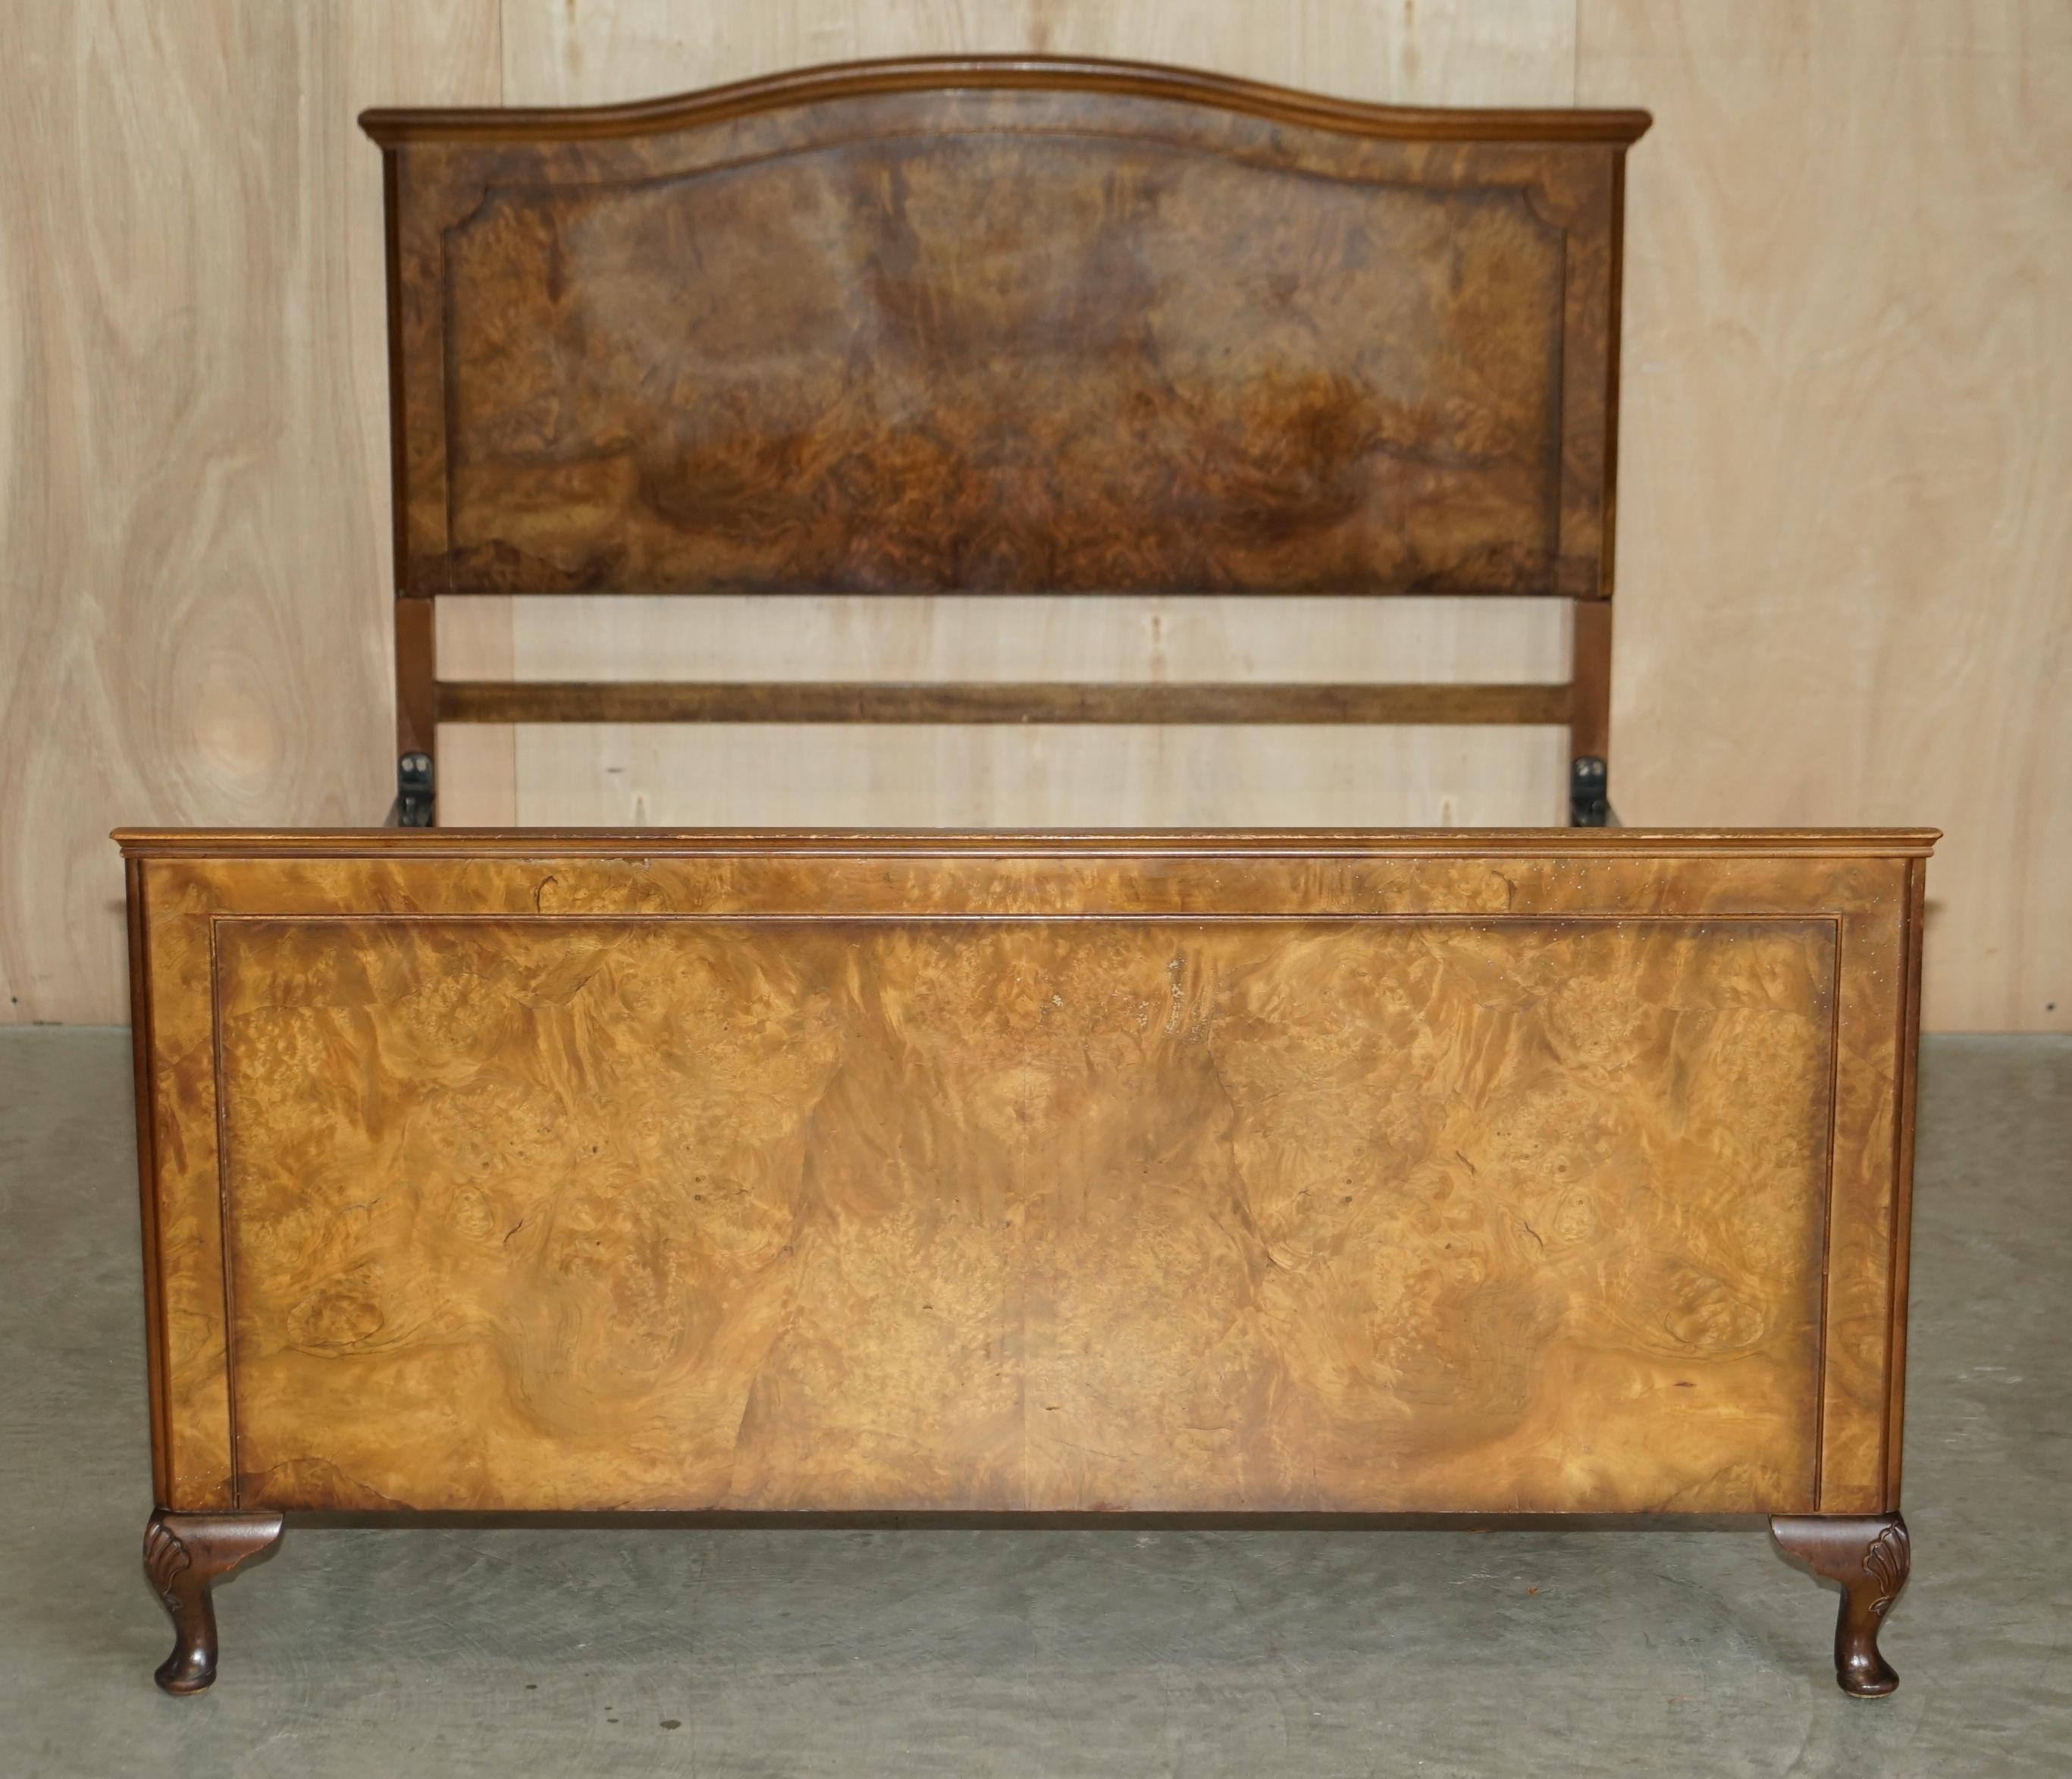 We are delighted to offer for sale this stunning Circa 1900 Burr Walnut bedstead frame with Vono rails

A lovely original hand made in England burr Walnut bed frame. The timber grain and colour is sublime, it looks rich and warm in any setting